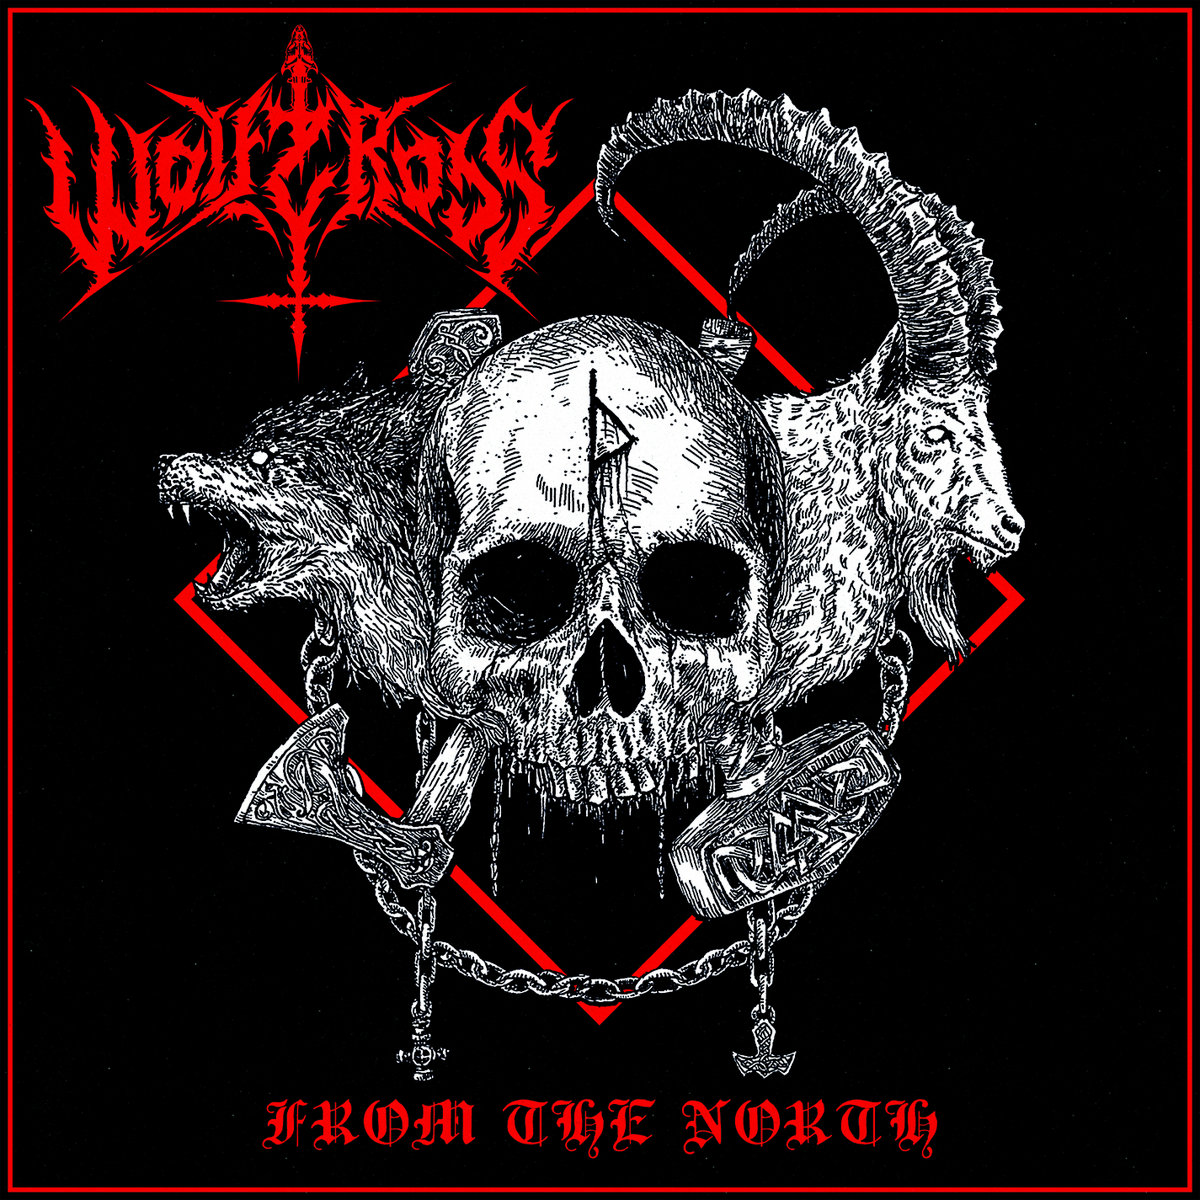 Wolfcross - From the North